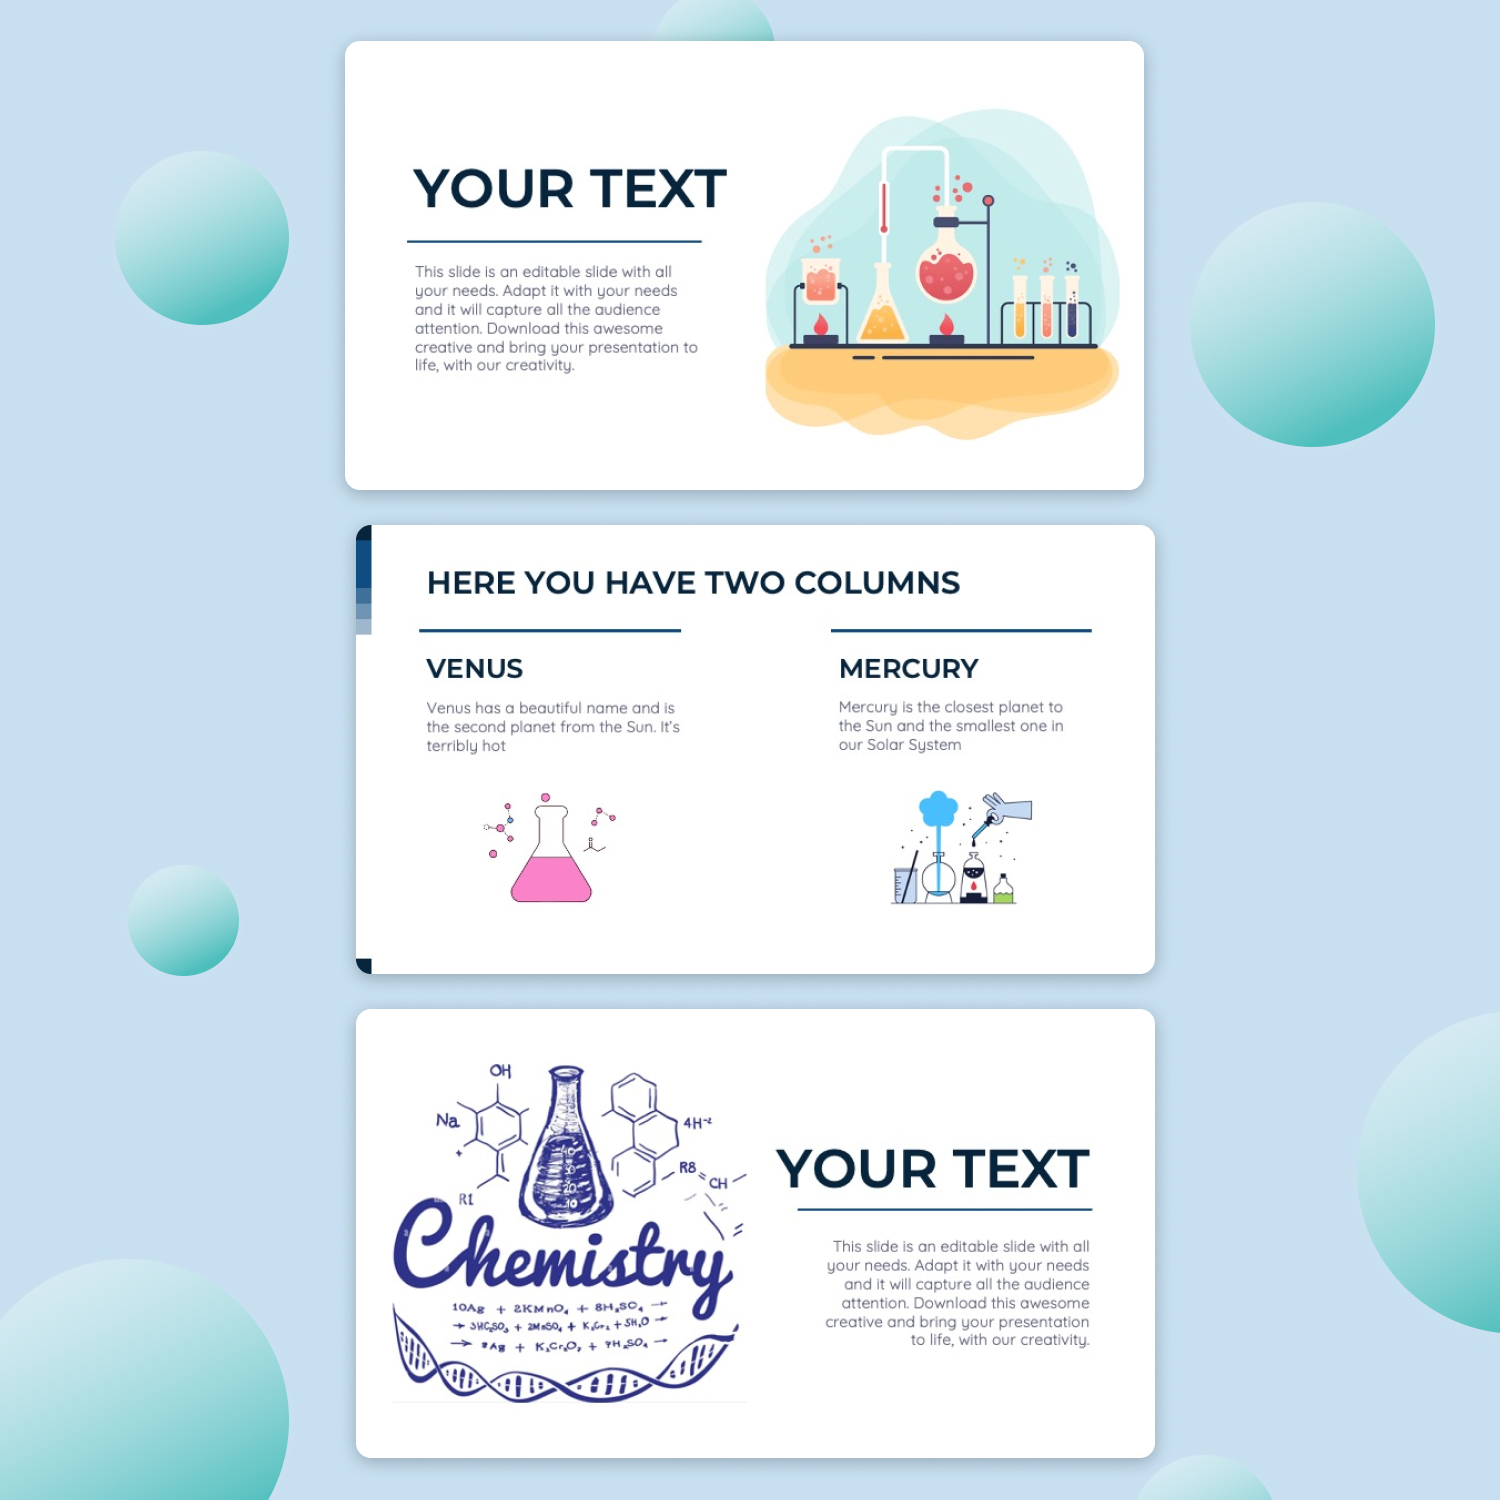 Free Science Powerpoint Template Chemistry Cover.